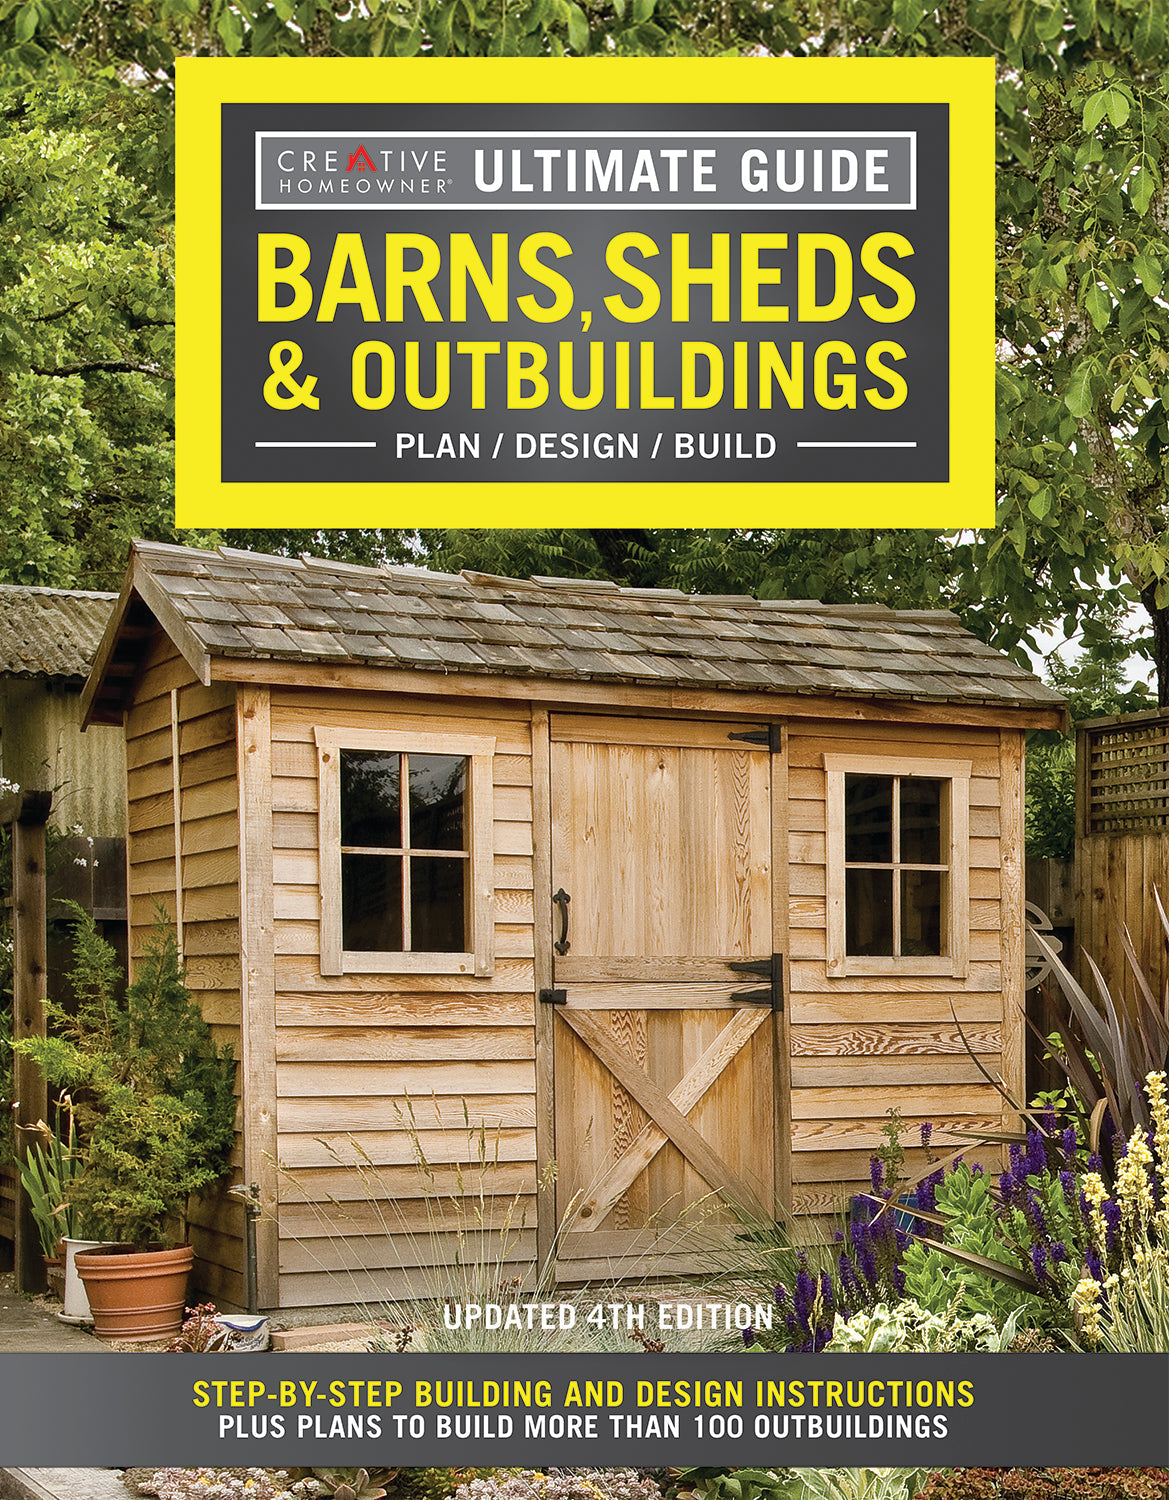 BARNS, SHEDS & OUTBUILDINGS, 4TH EDITION